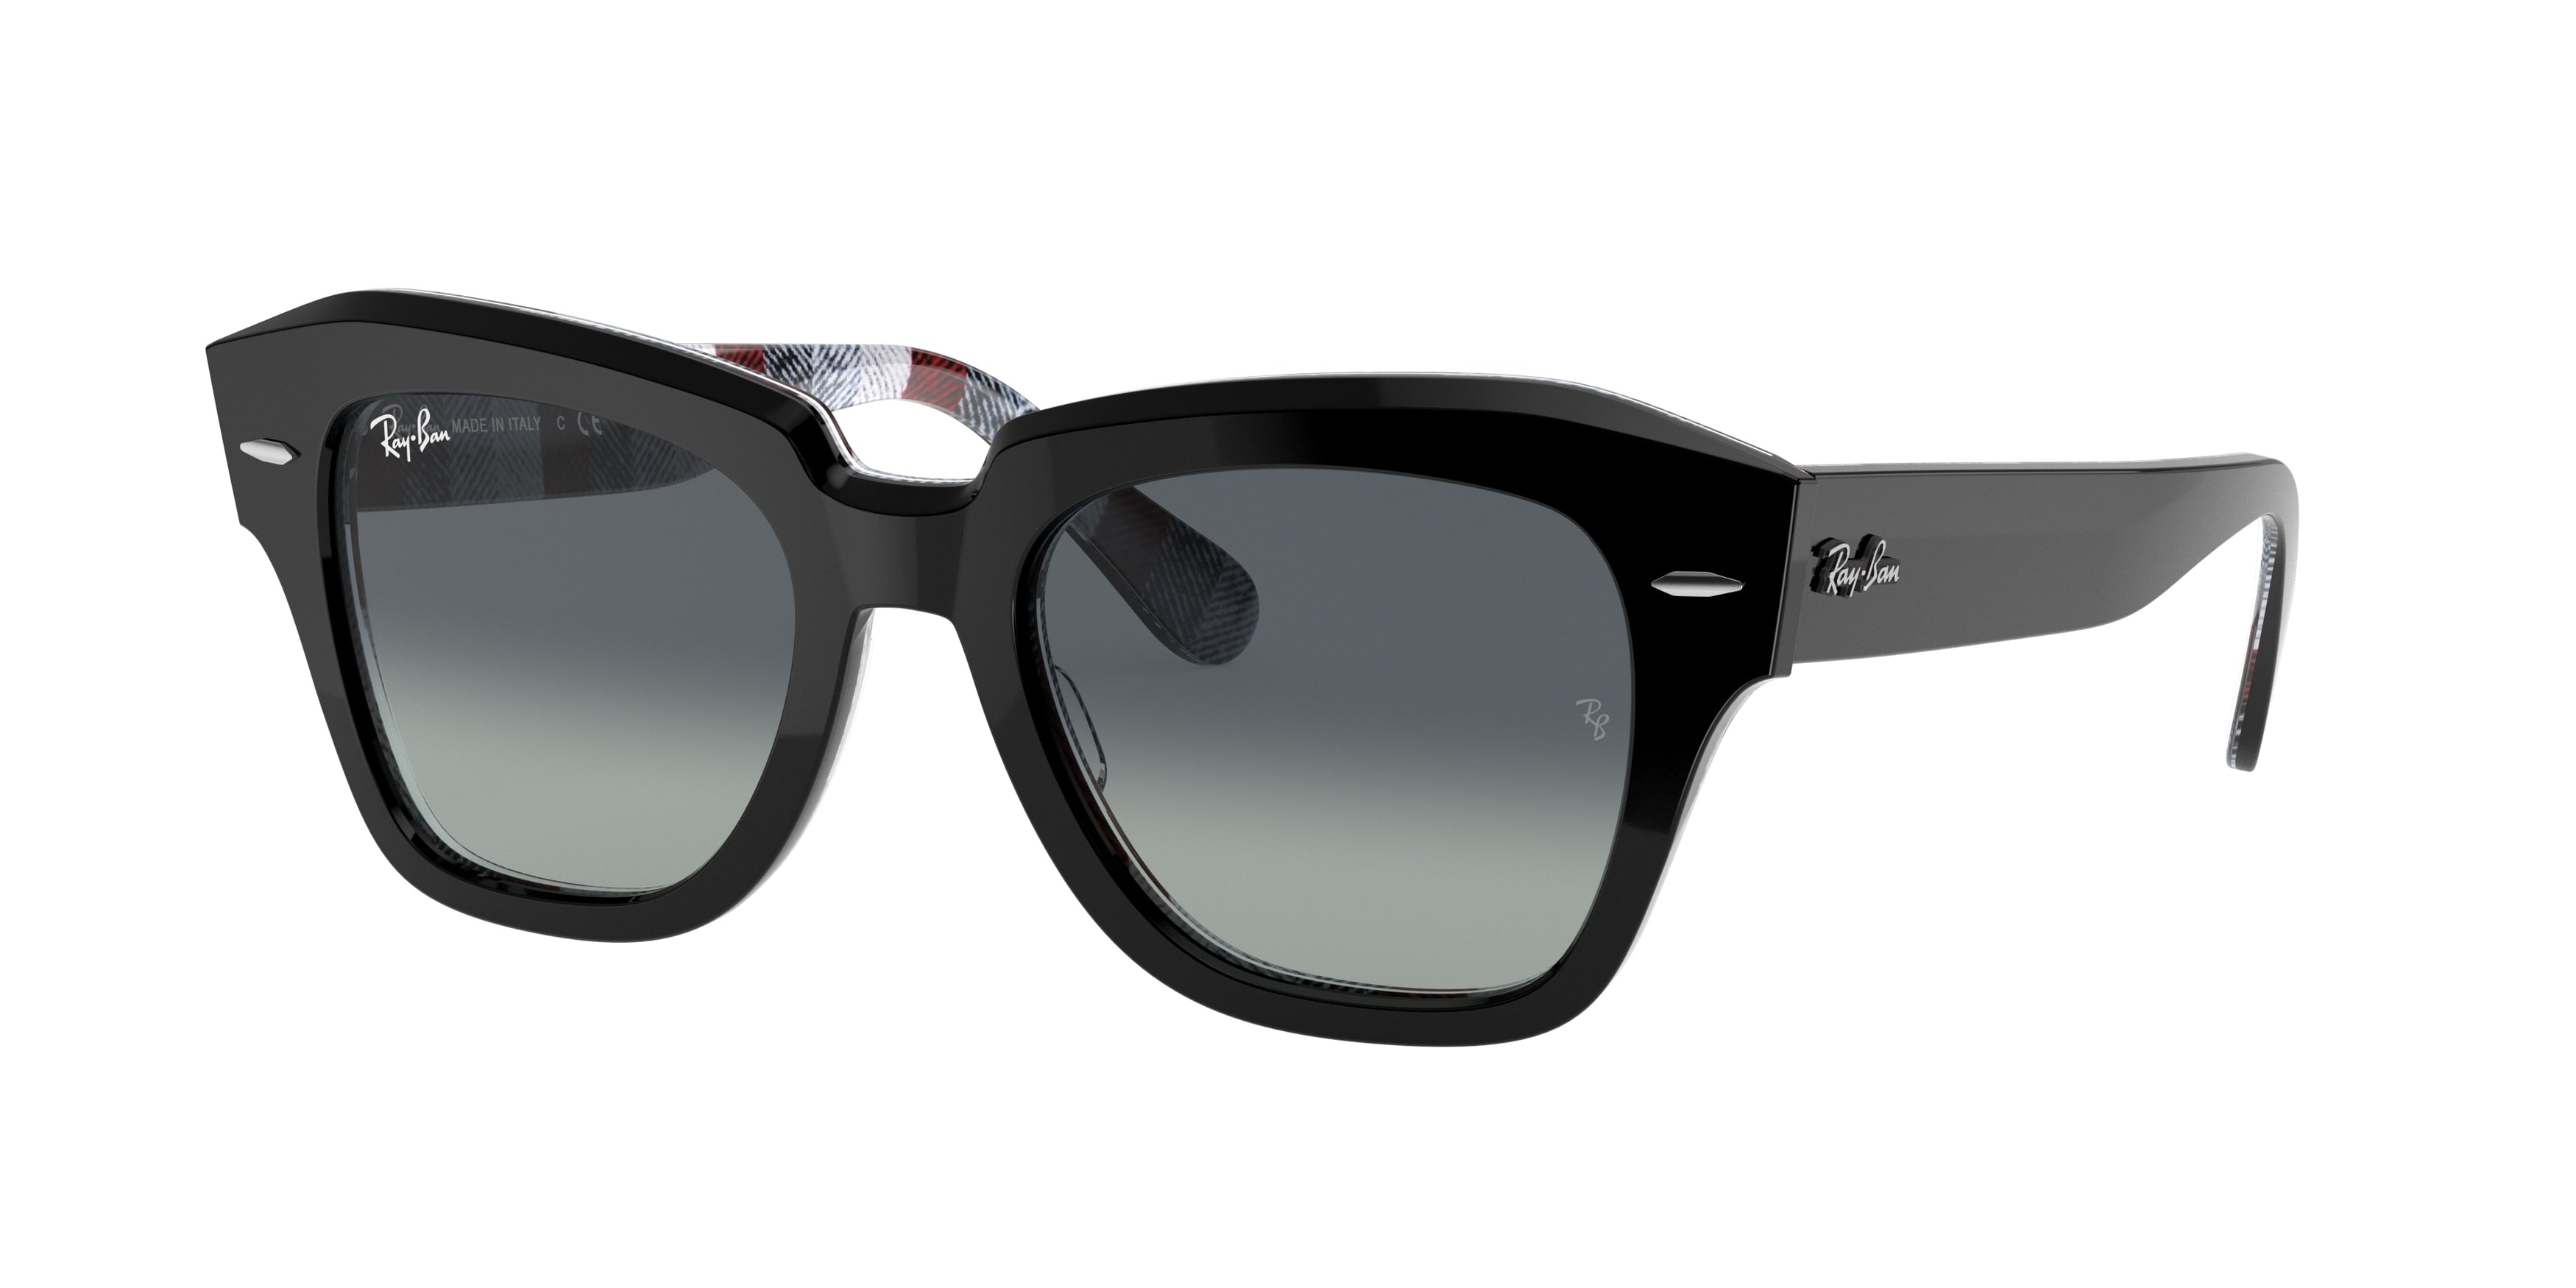 Ray-Ban STATE STREET RB2186 Square Sunglasses  13183A-Black 49-145-20 - Color Map Black